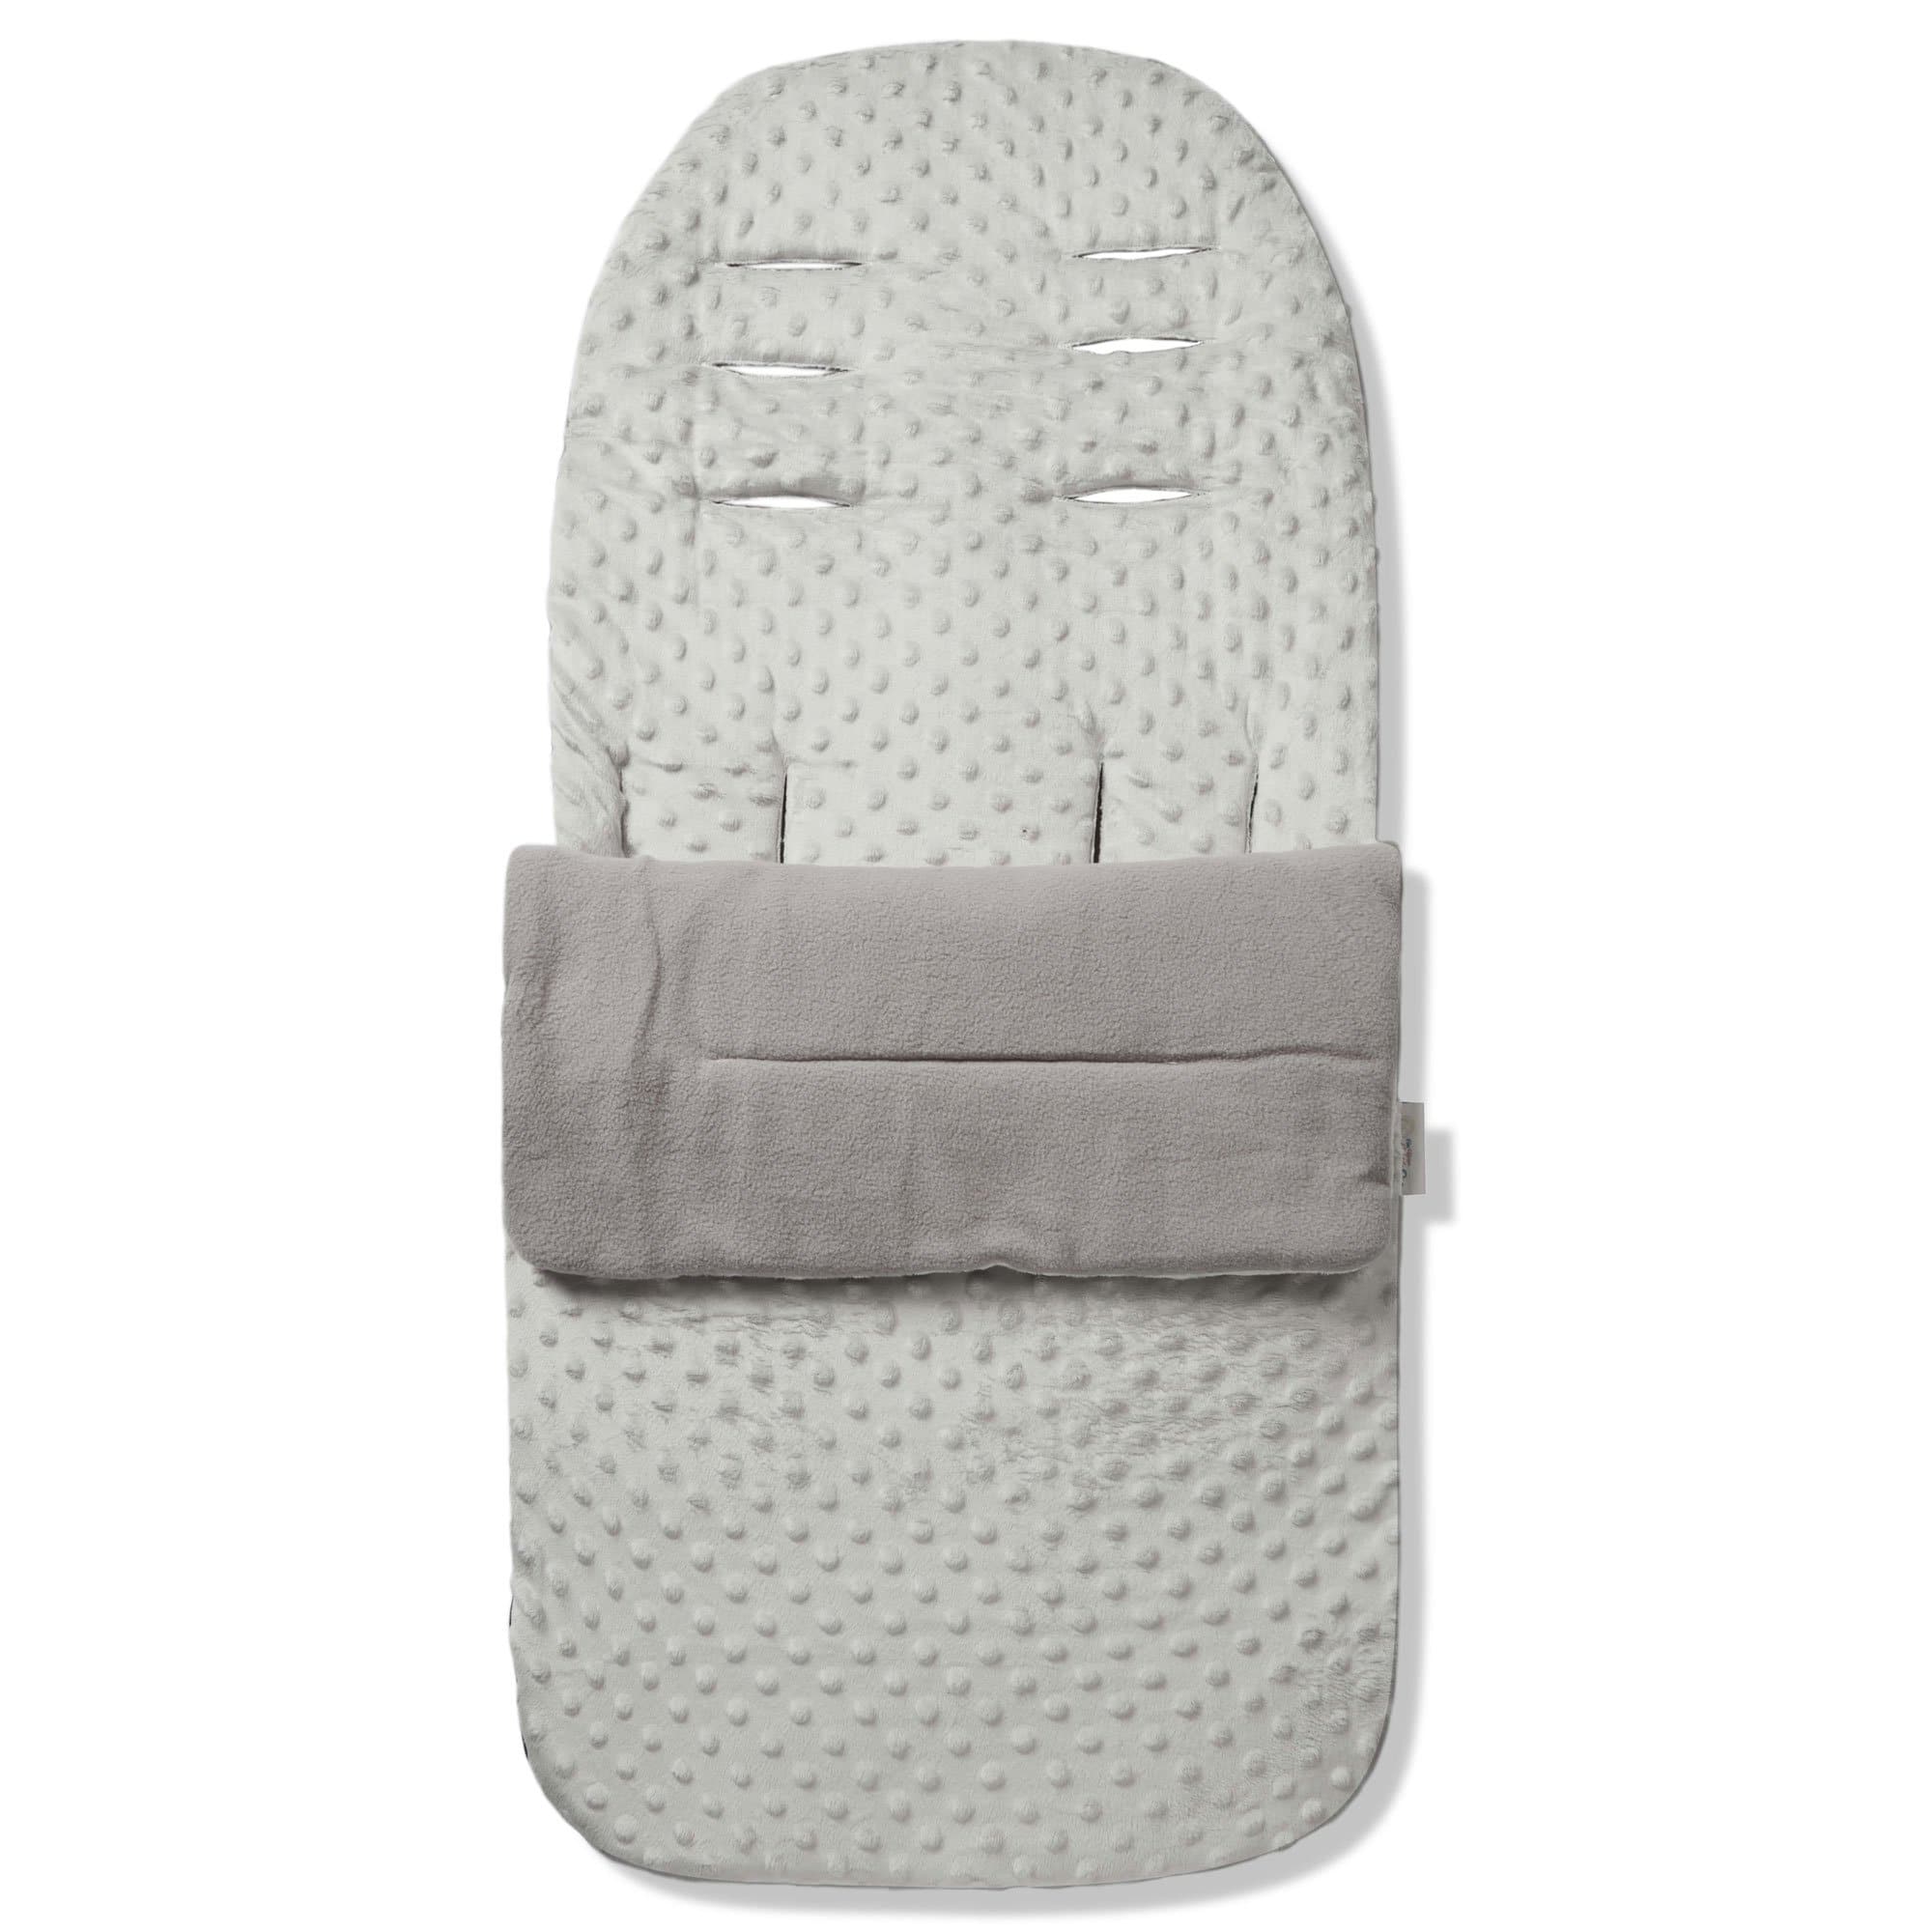 Dimple Footmuff / Cosy Toes Compatible with Inglesina - Grey / Fits All Models | For Your Little One